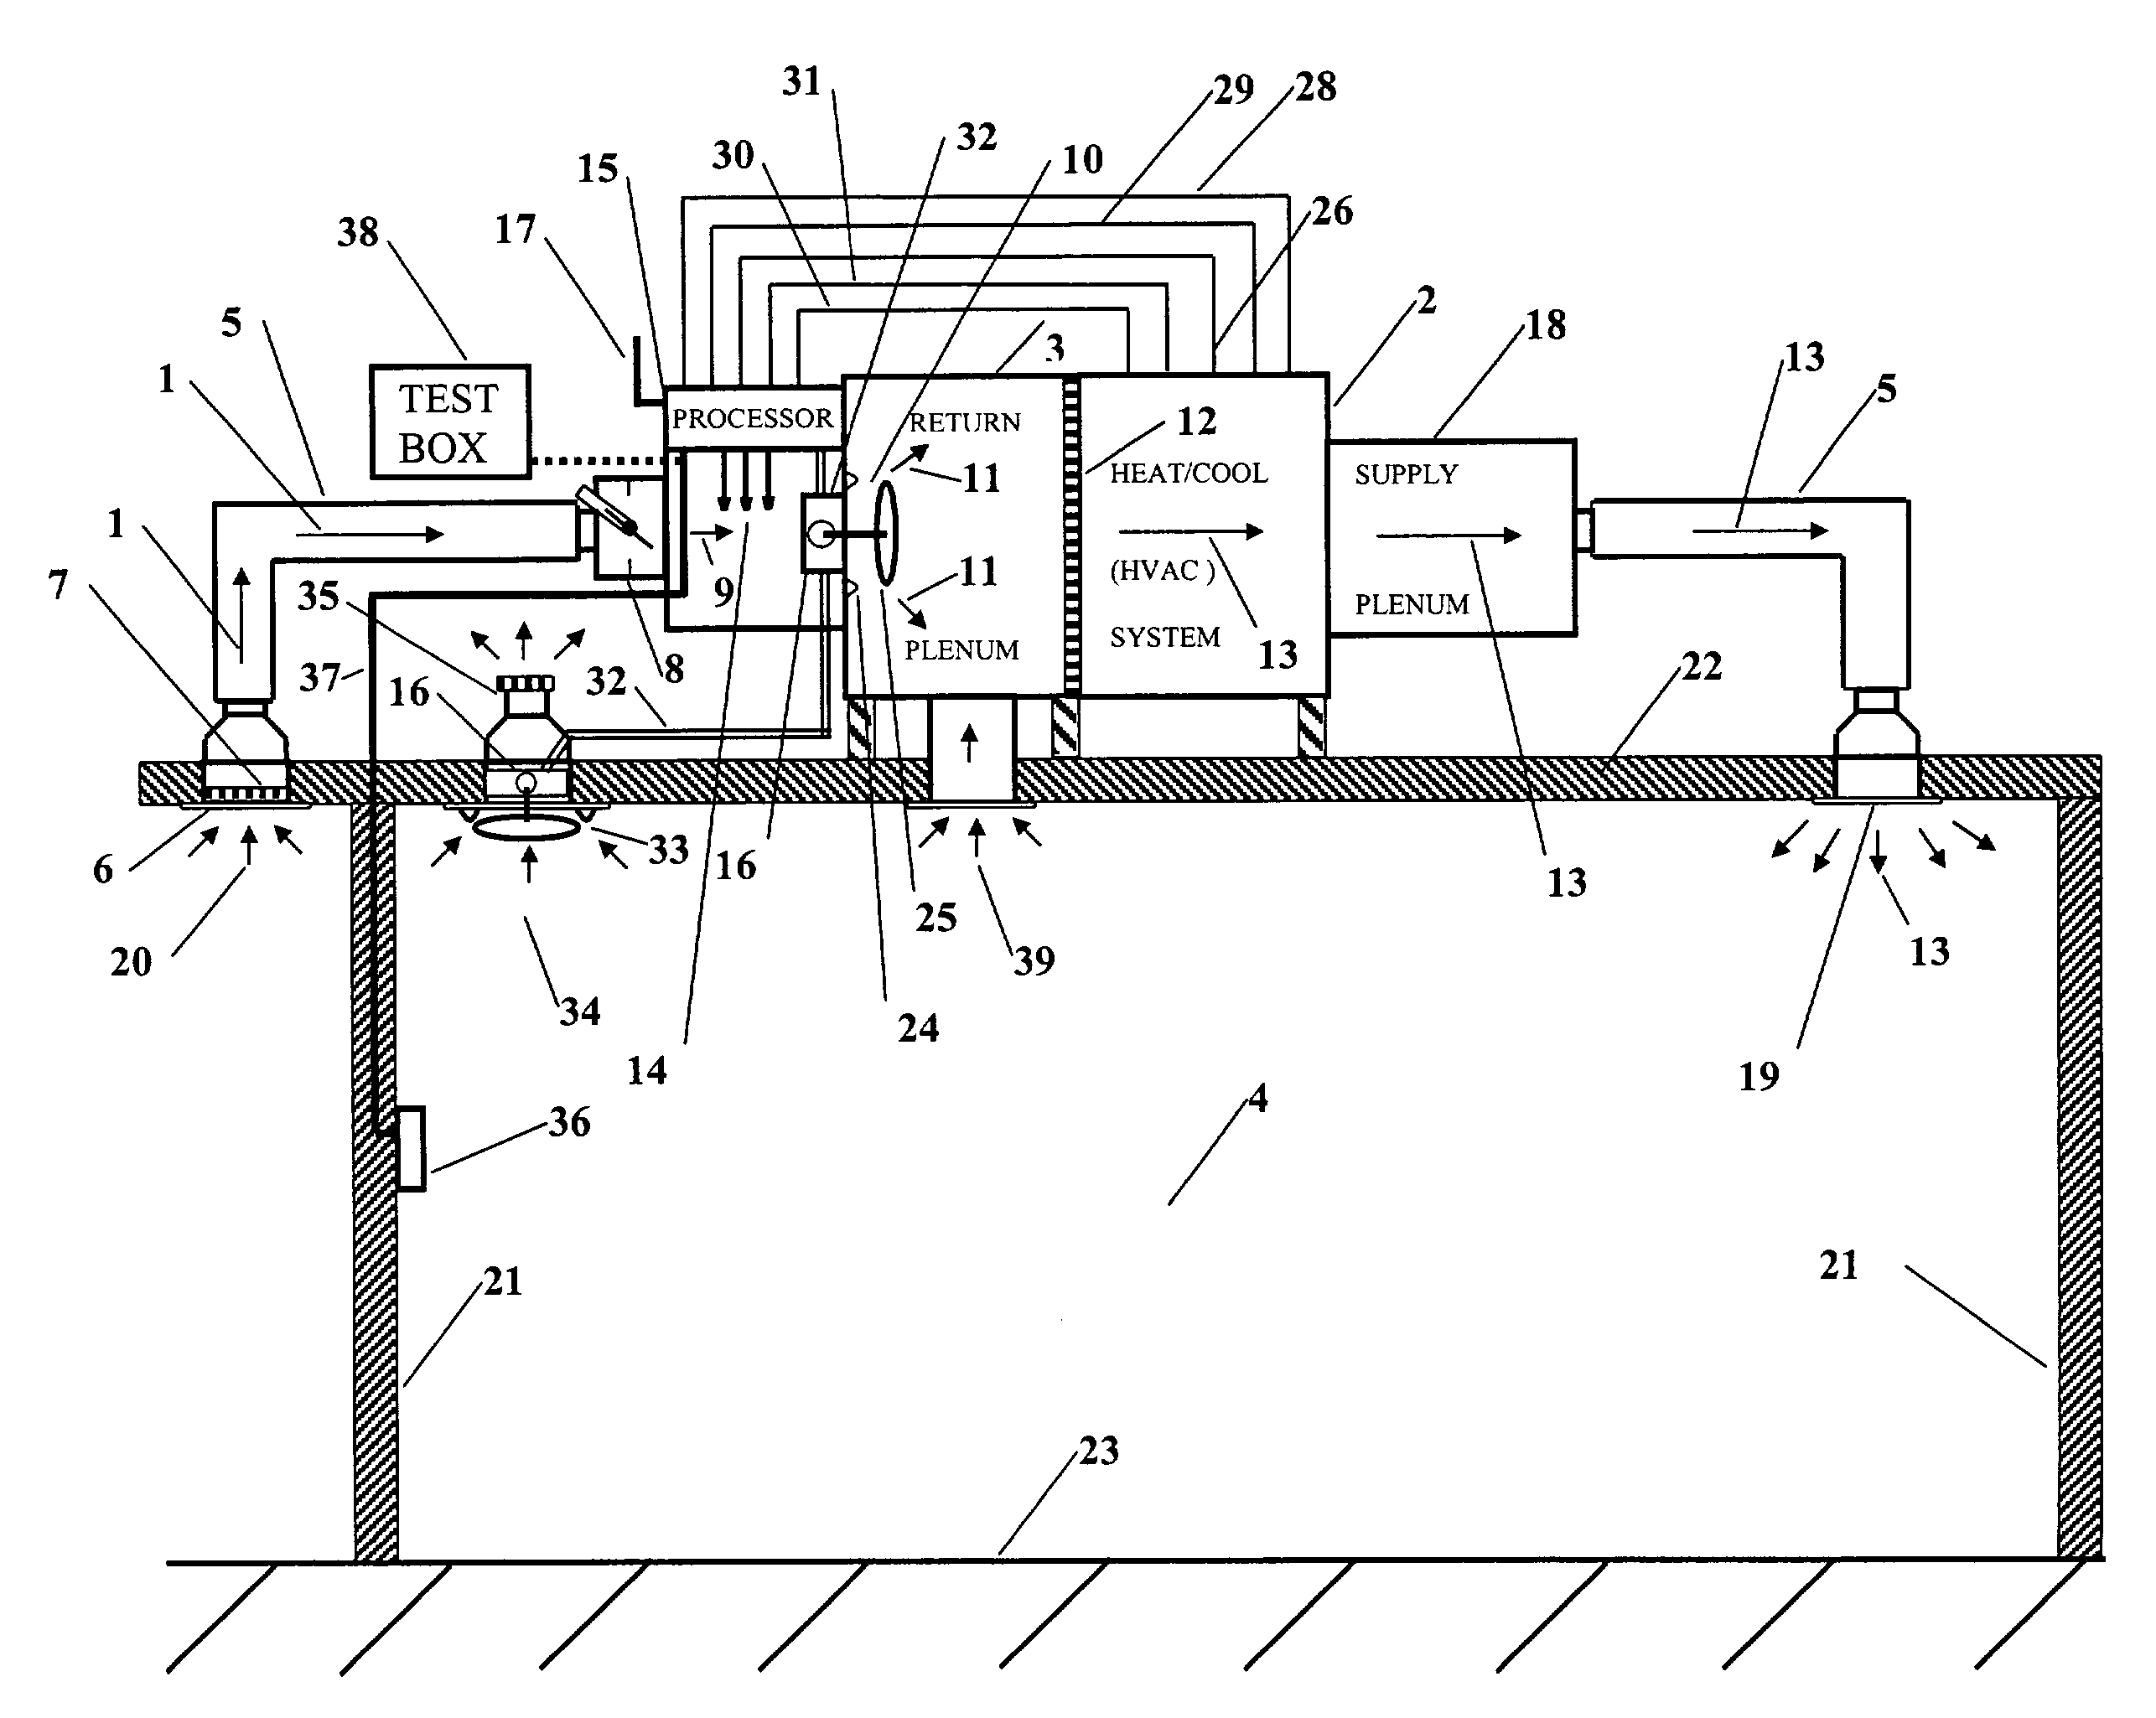 Method and apparatus for sampling and controlling ventilation airflow into a structure